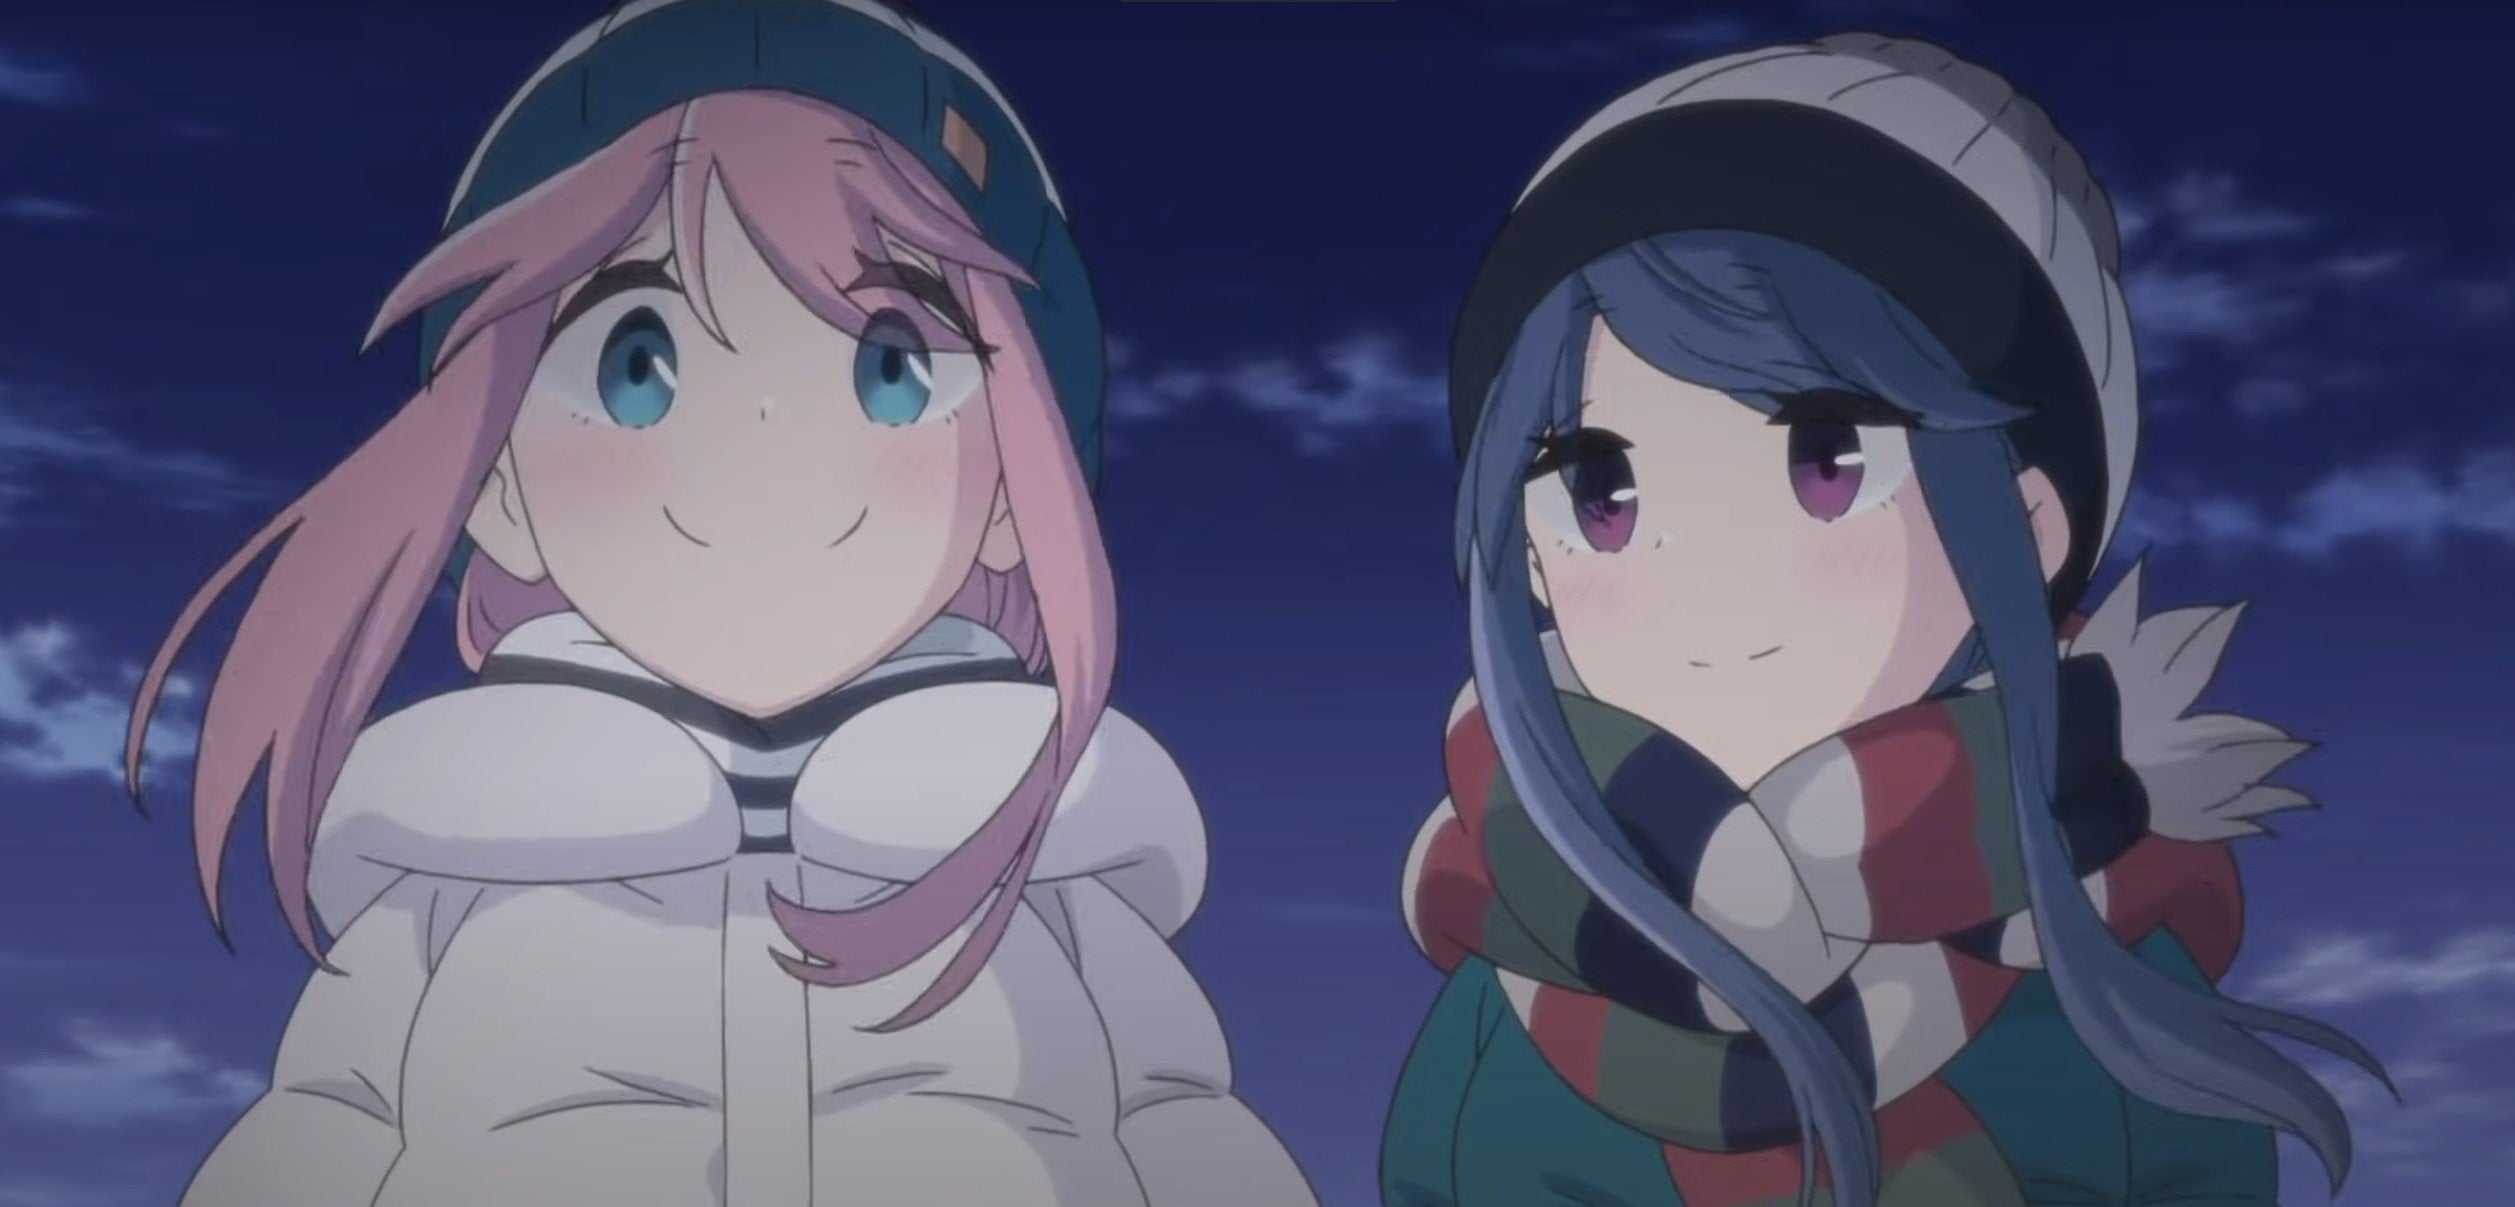 Rin and Nadeshiko in the second opening animation for Laid-Back Camp.